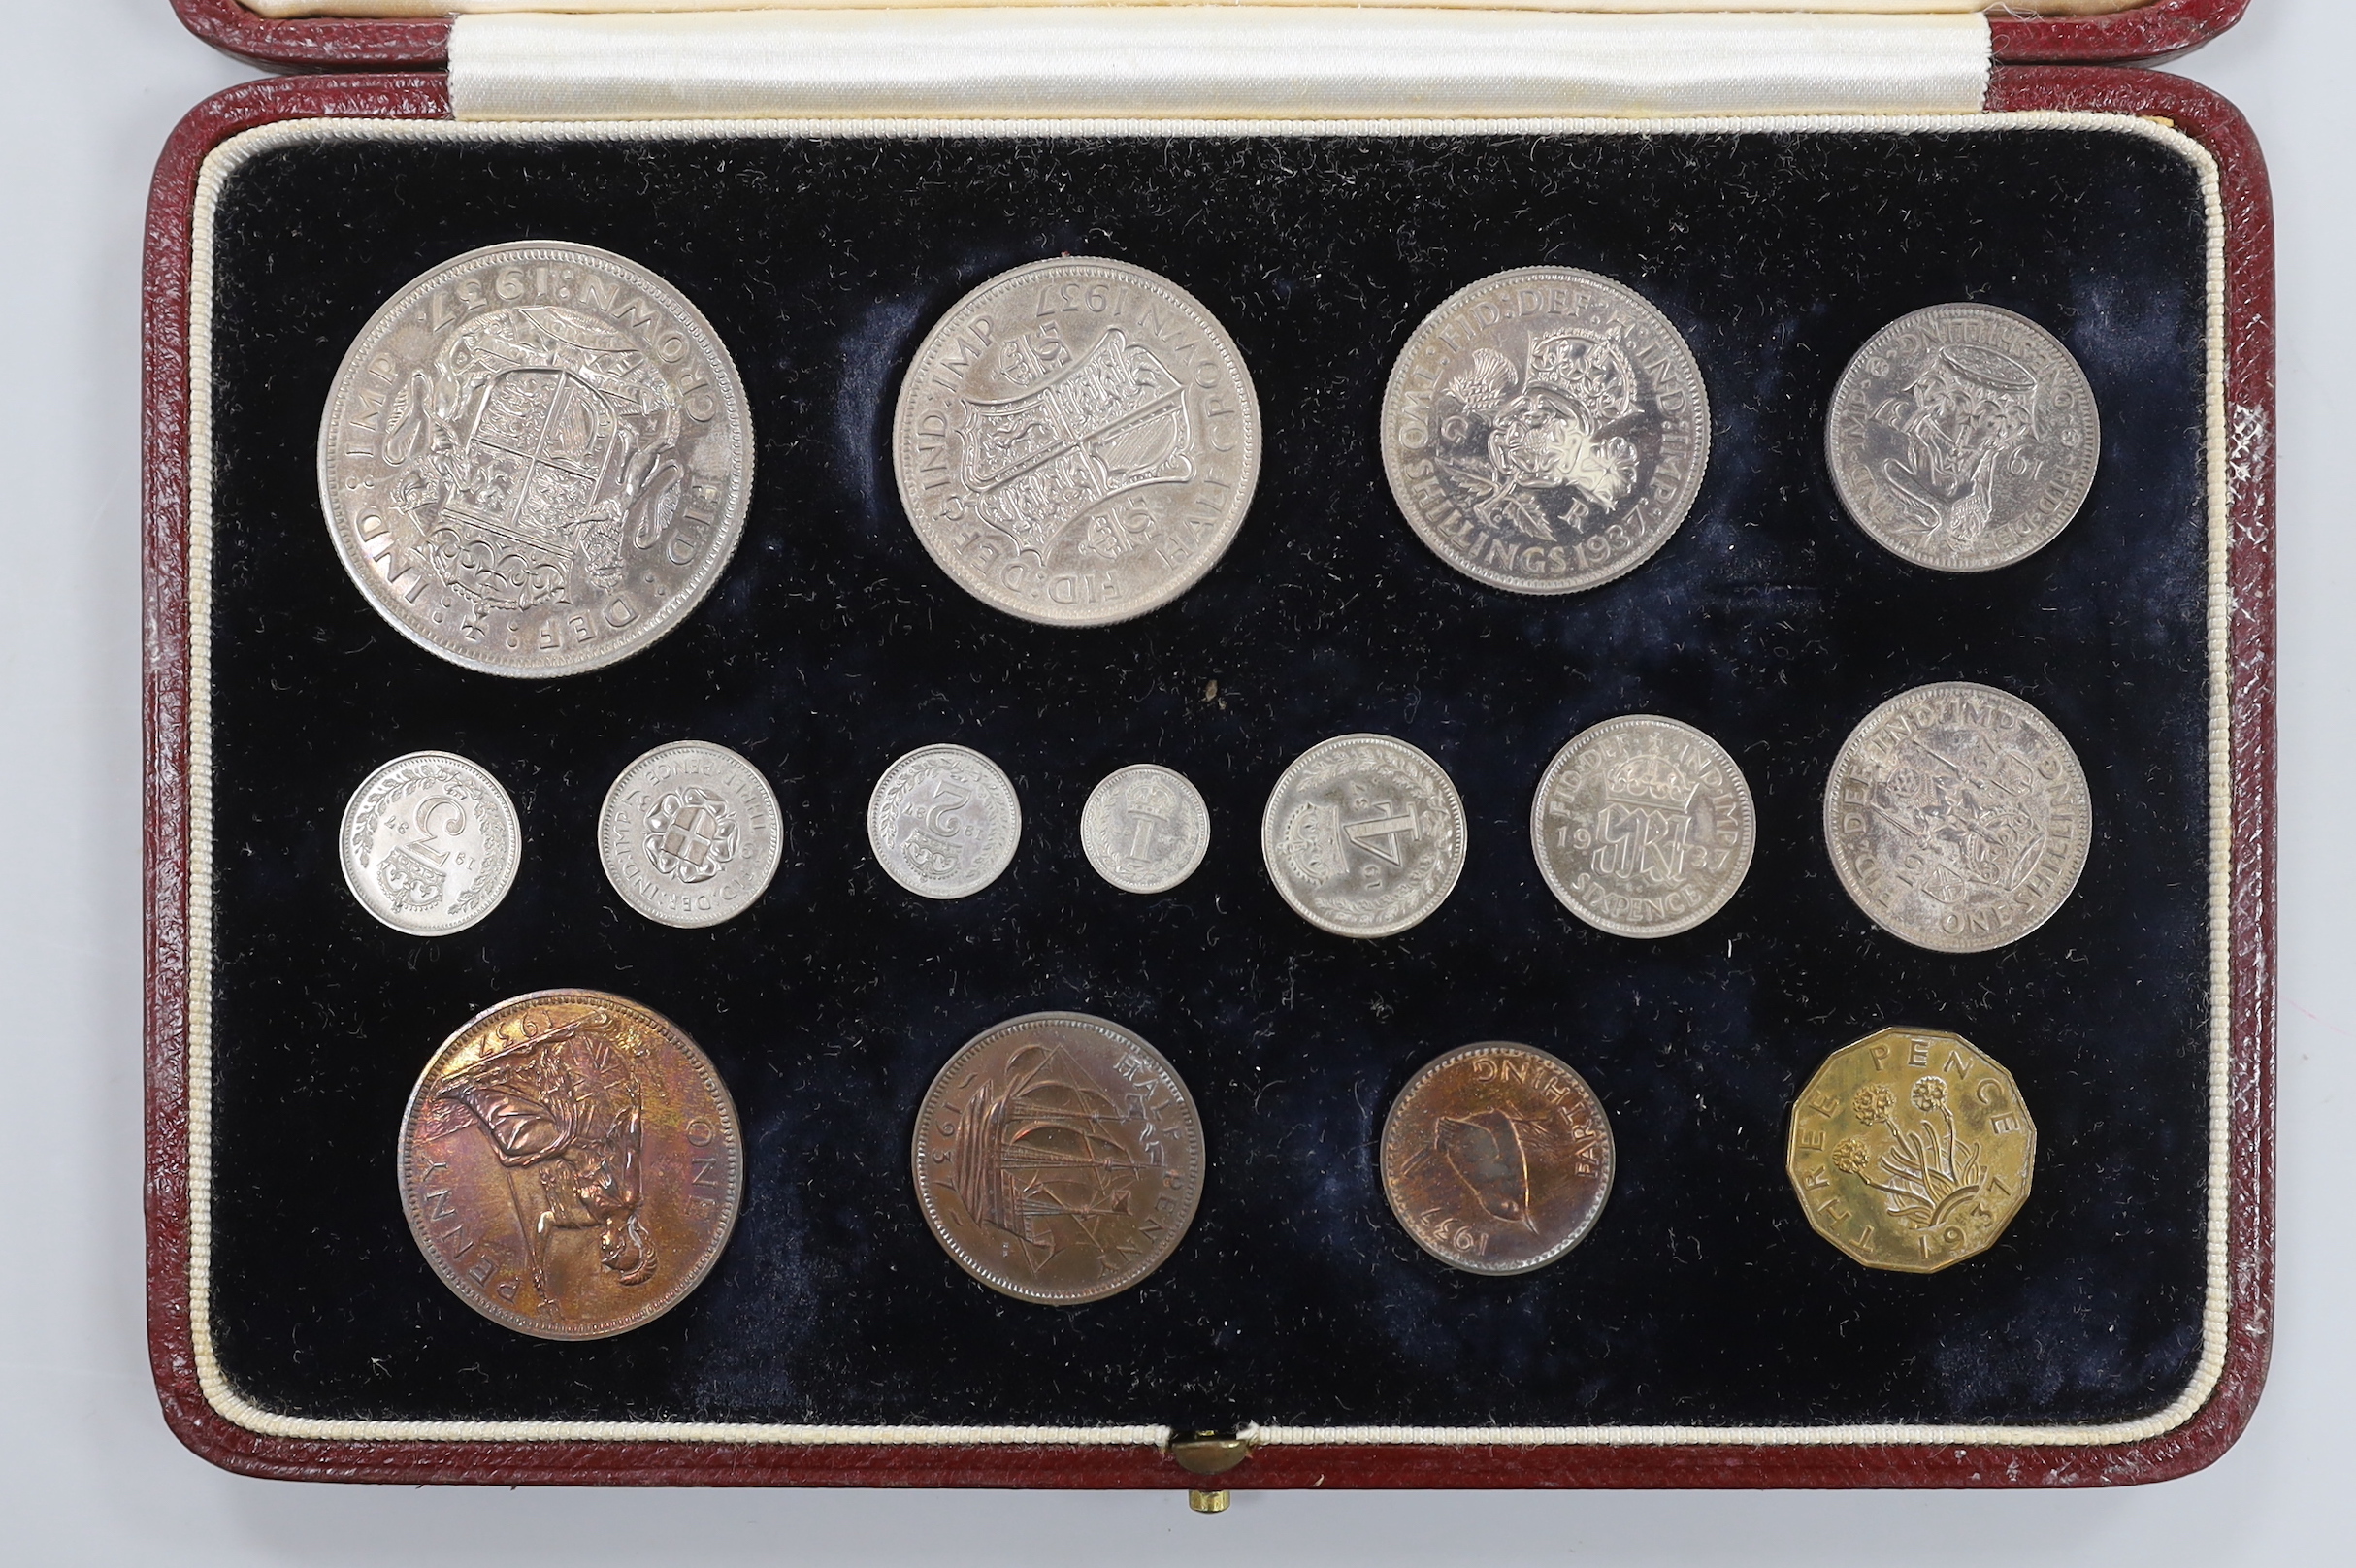 A cased George VI 1937 coronation specimen coin set, Including maundy 1d - 4d, and farthing through to crown, 15 coins